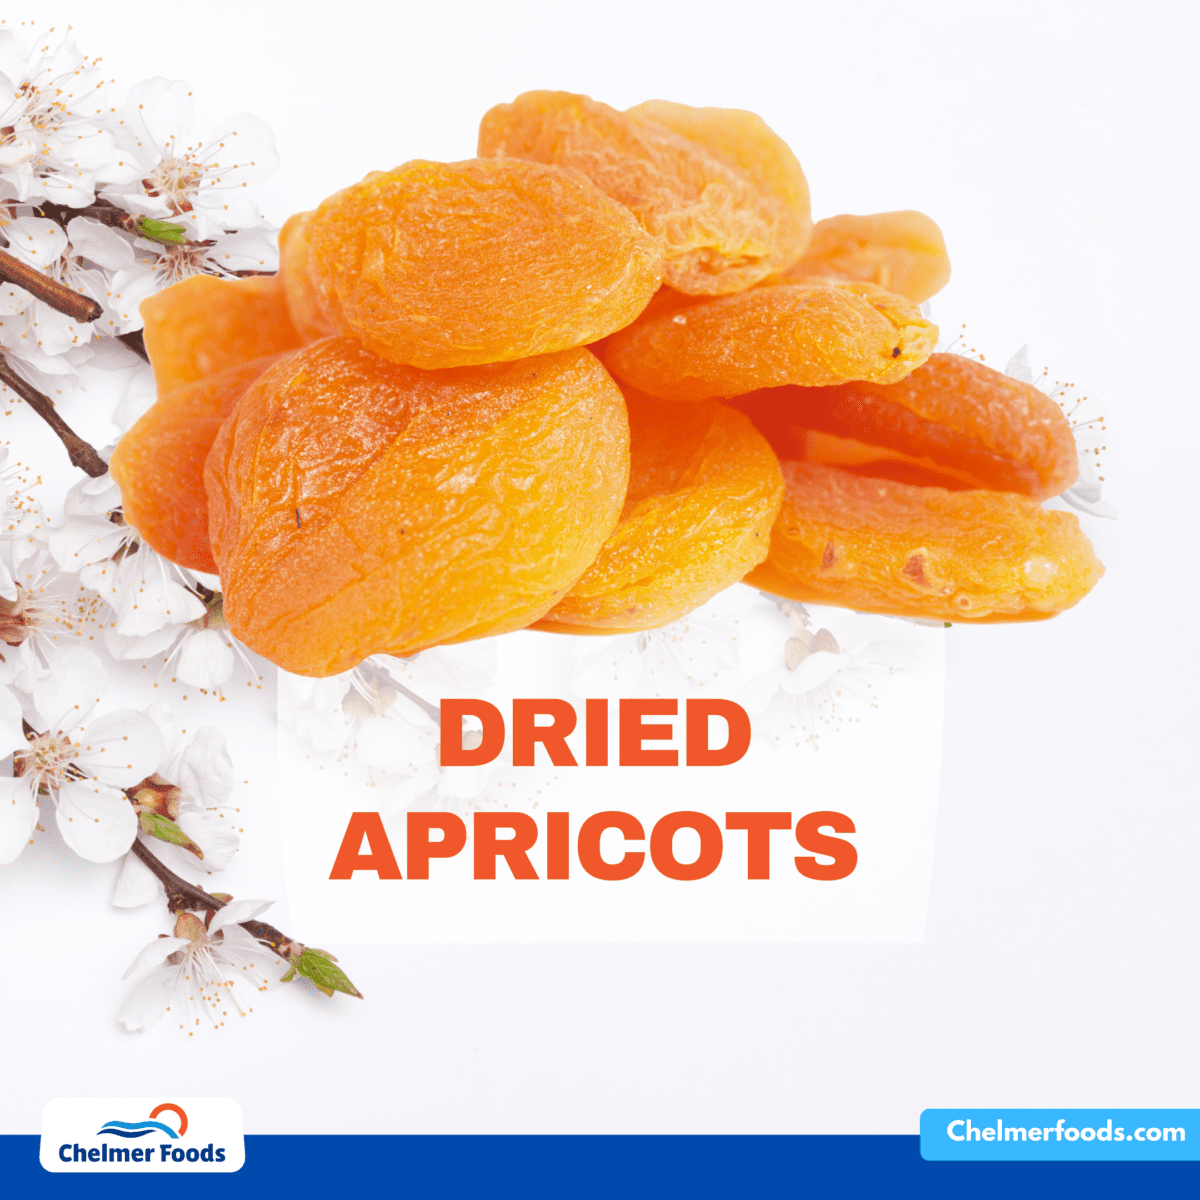 Dried apricots: prices are difficult to determine